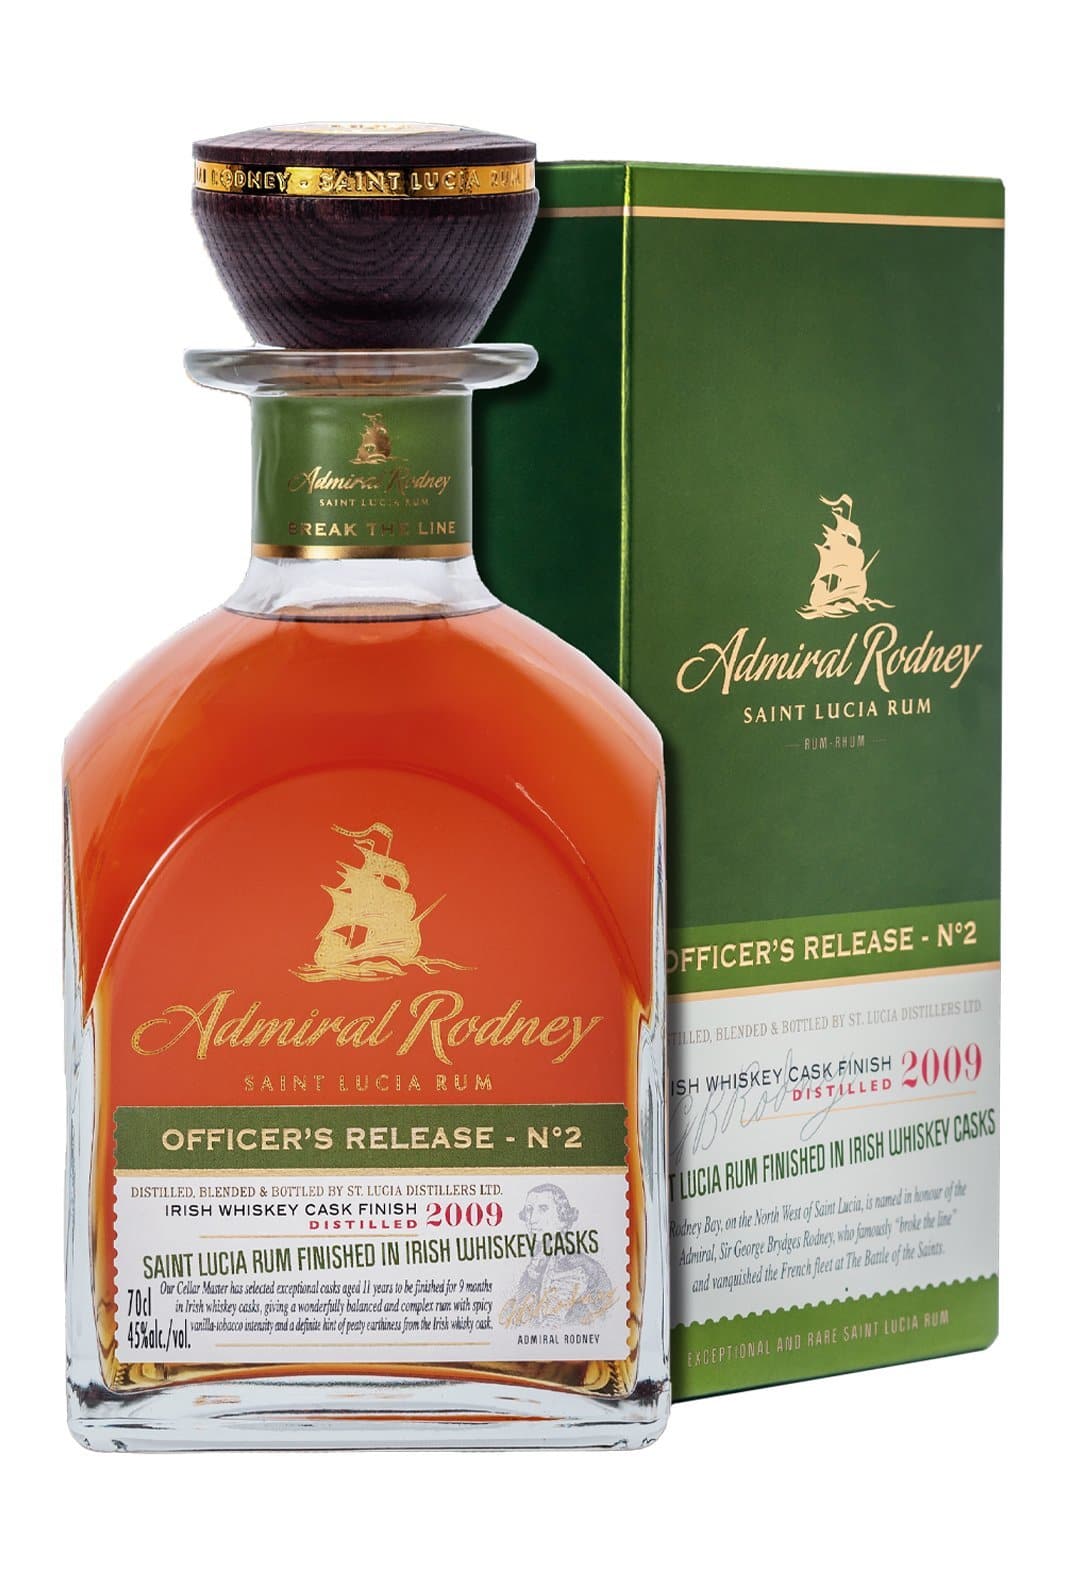 Admiral Rodney Officers Release No.2 Rum 45% 700ml | Rum | Shop online at Spirits of France